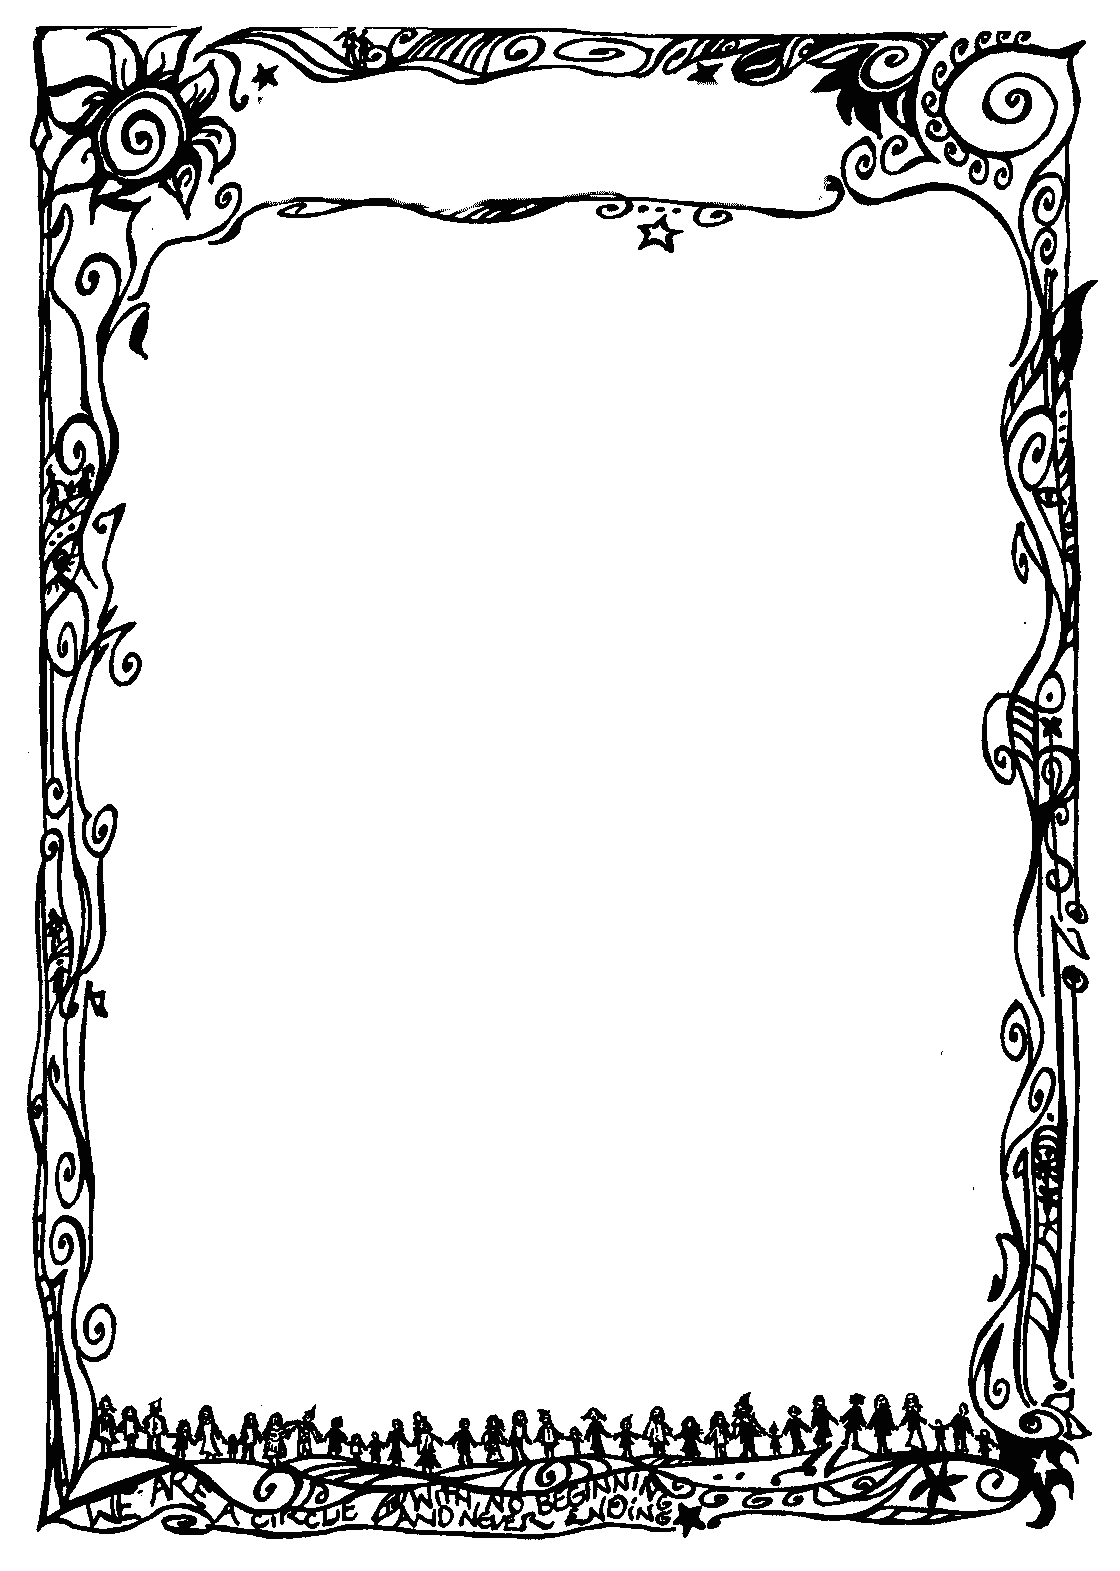 Boarder clipart fancy. Borders for word documents